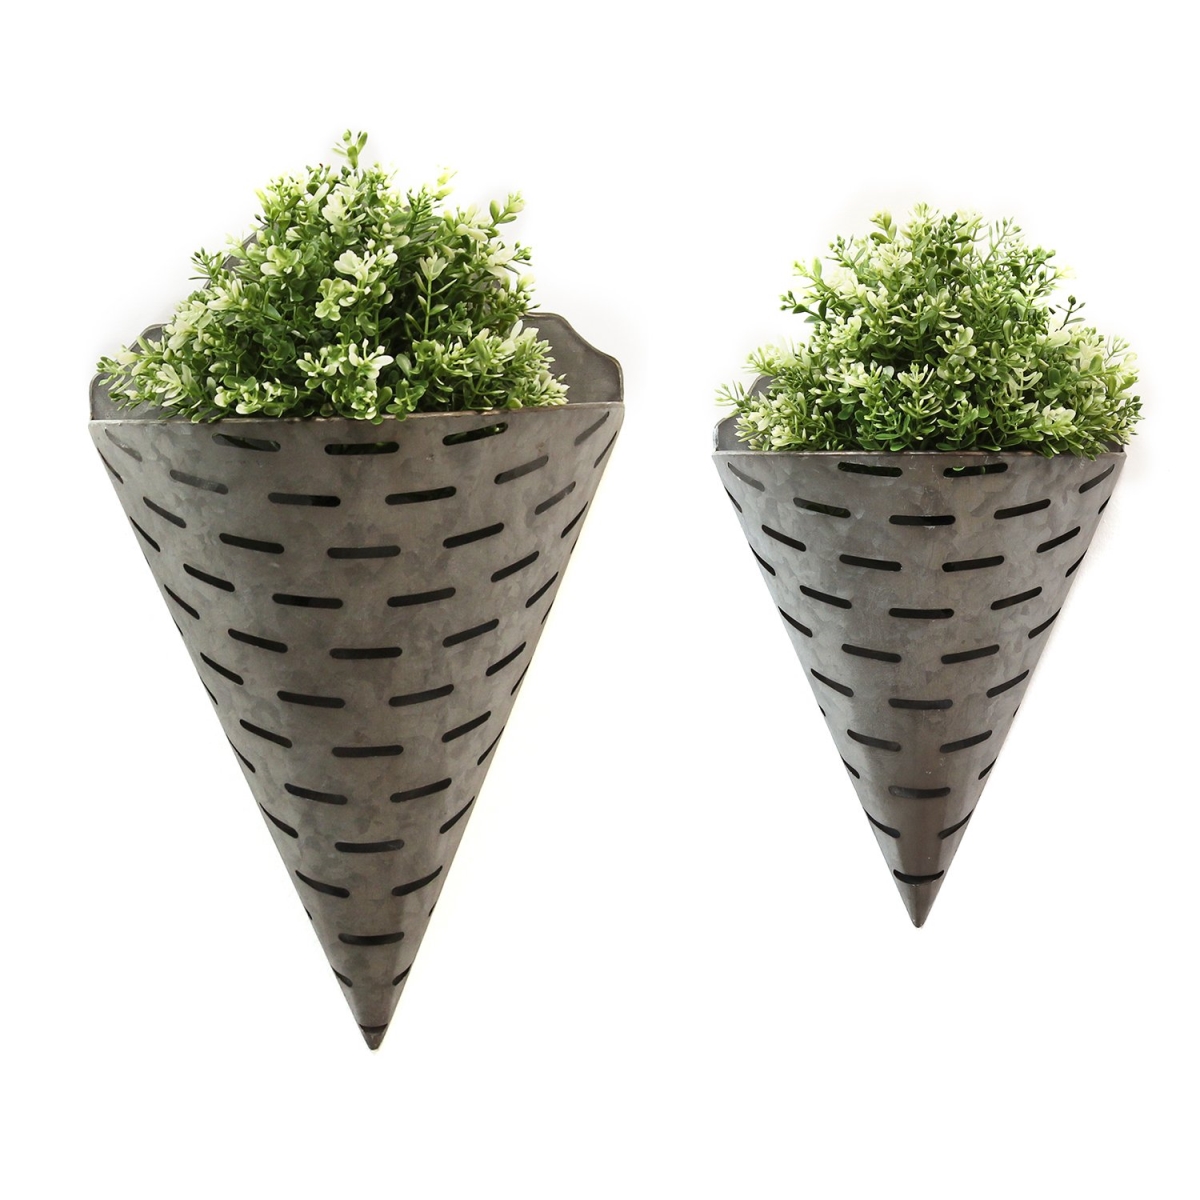 Home Roots Beddings 331483 Bucket Wall Planters, Galvanized - Set Of 2